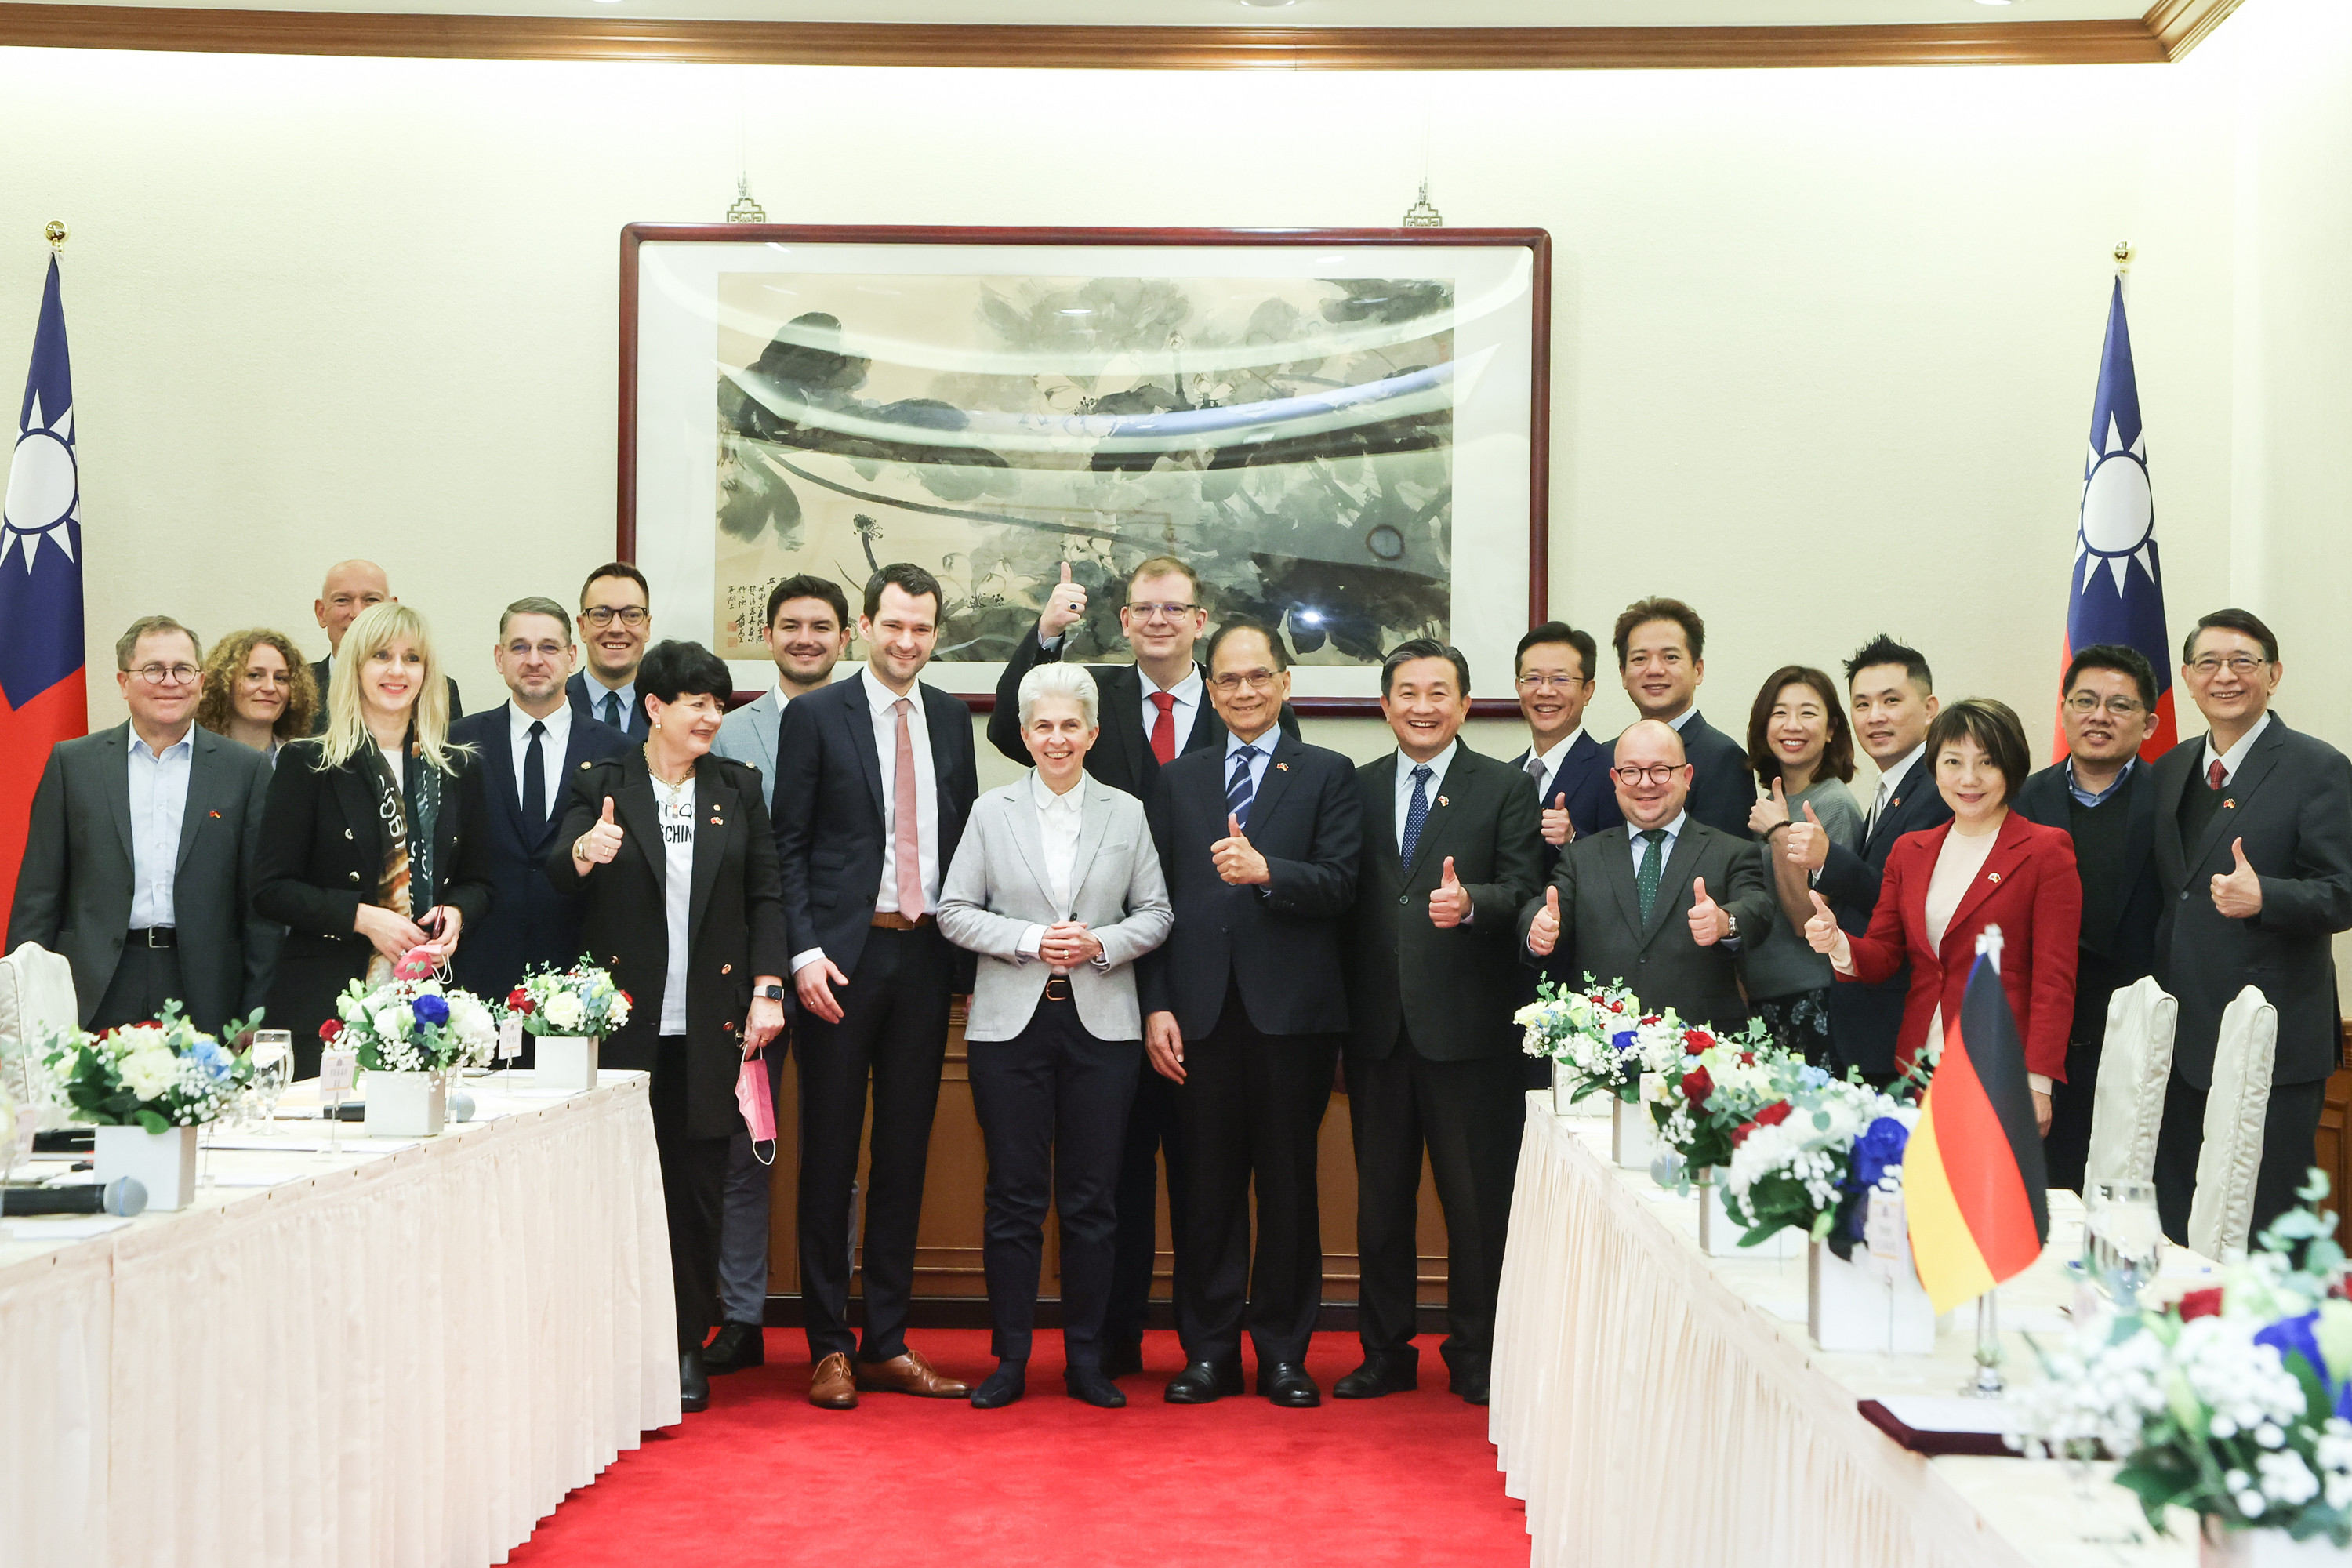 The German delegation from the Free Democratic Party met Taiwan’s legislature speaker Yu Shyi-kun. The group was headed by the chair of the Bundestag defence committee, Marie-Agnes Strack-Zimmermann, and the party’s deputy chair, Johannes Vogel. Photo: CNA